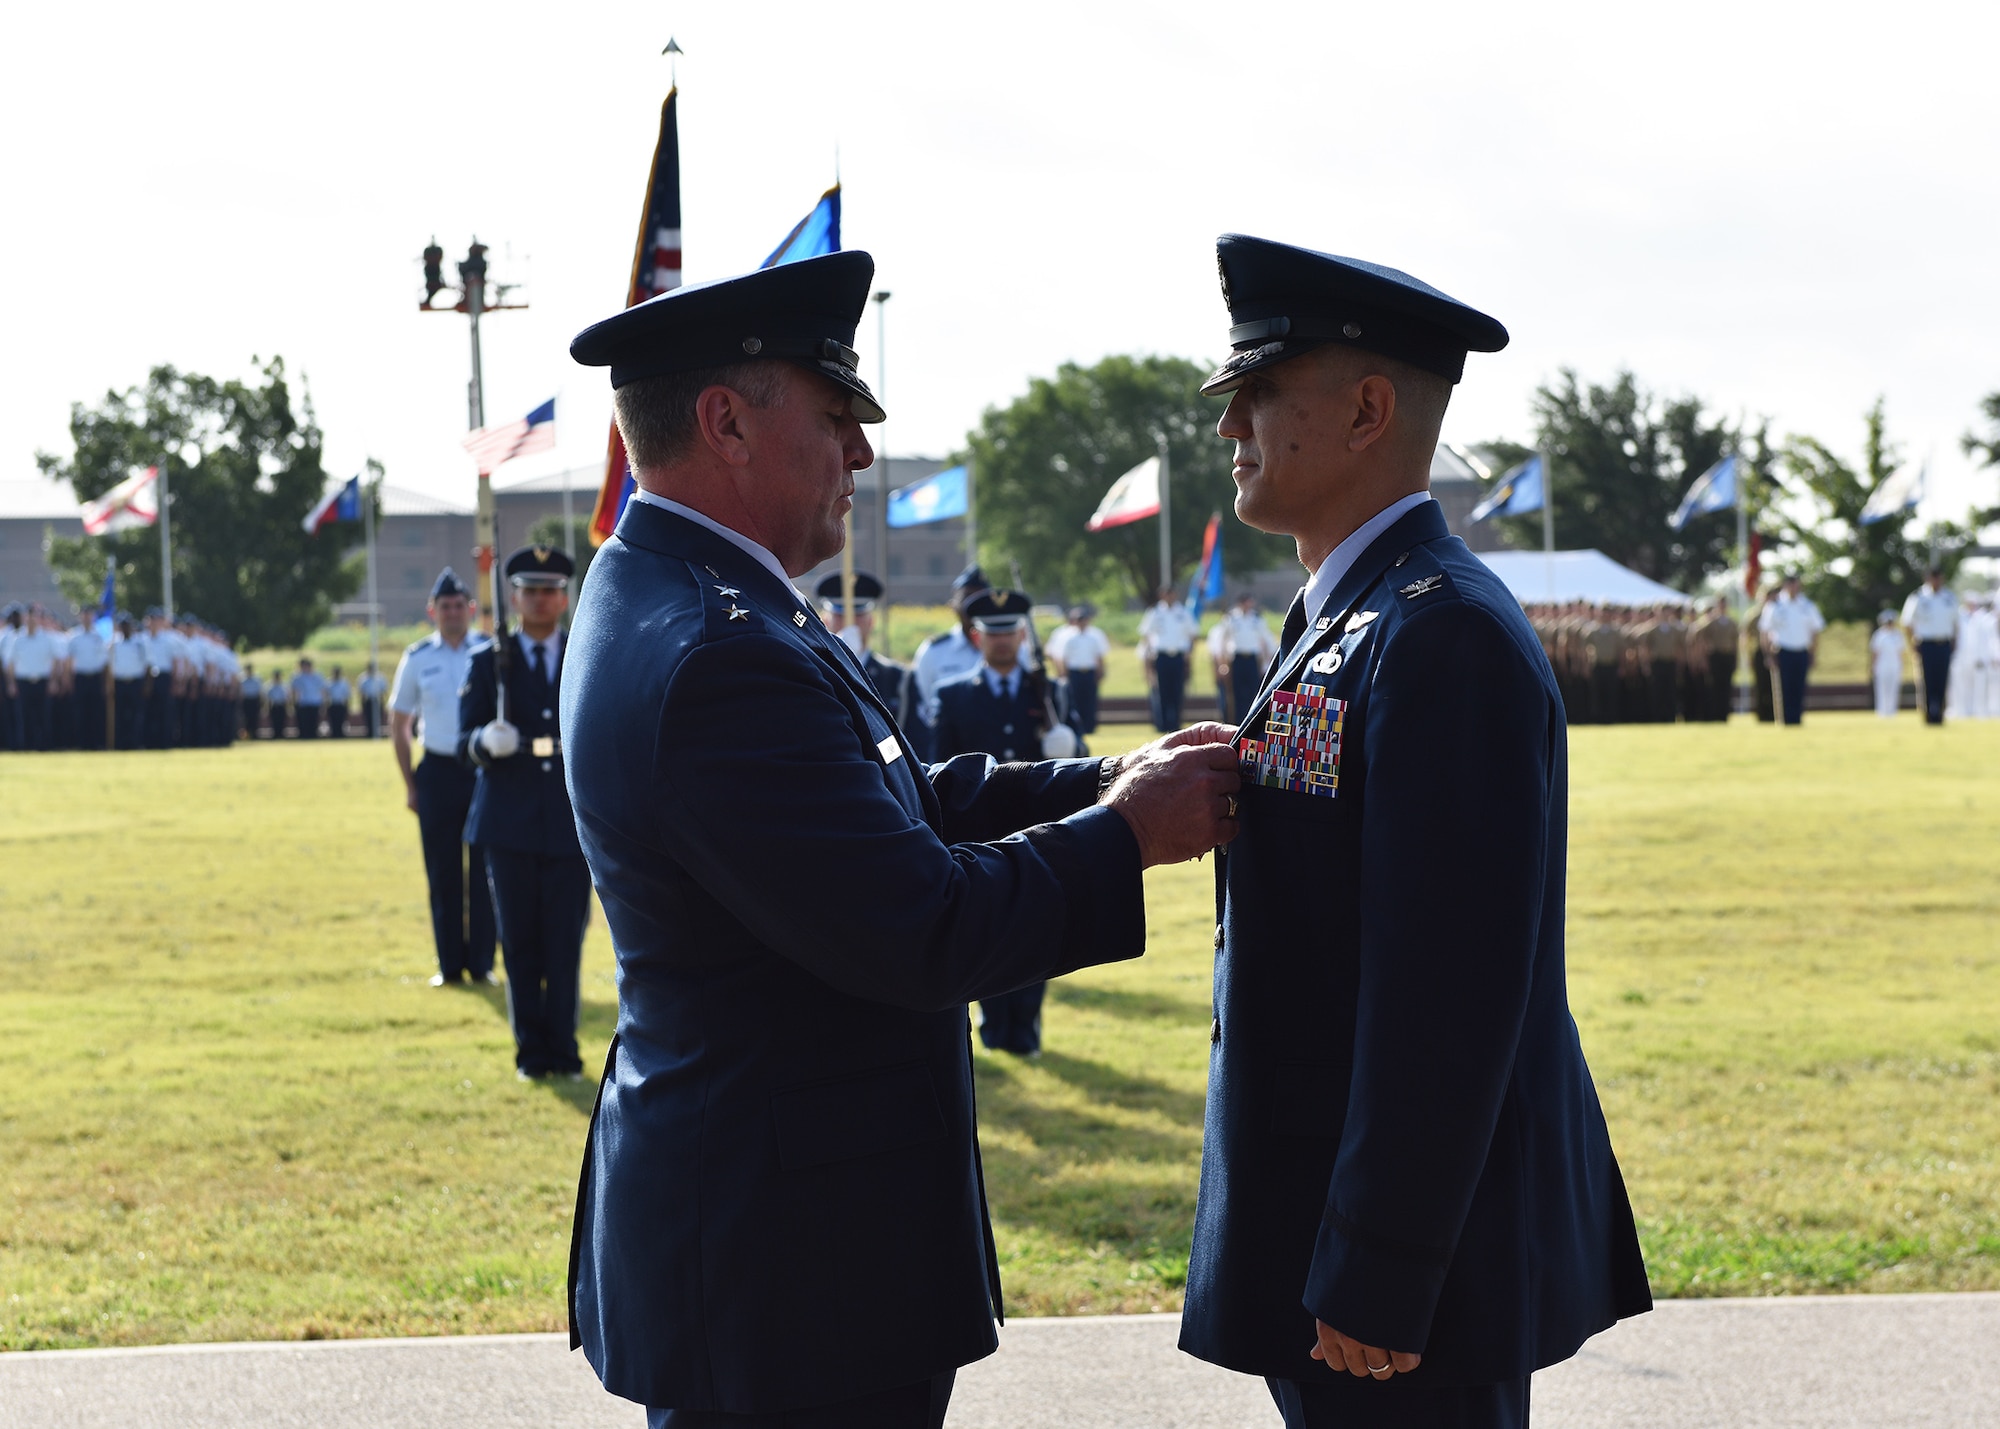 U.S. Air Force Maj. Gen. Timothy Leahy, Second Air Force commander, presents the Legion of Merit to the outgoing commander, Col. Ricky Mills, during the 17th Training Wing change of command ceremony at the parade field on Goodfellow Air Force Base, Texas, June 28, 2019. Mills is moving to Maxwell Air Force Base, Ala., where he will serve as the commandant of the Squadron Officer School. (U.S. Air Force photo by Staff Sgt. Chad Warren/Released)